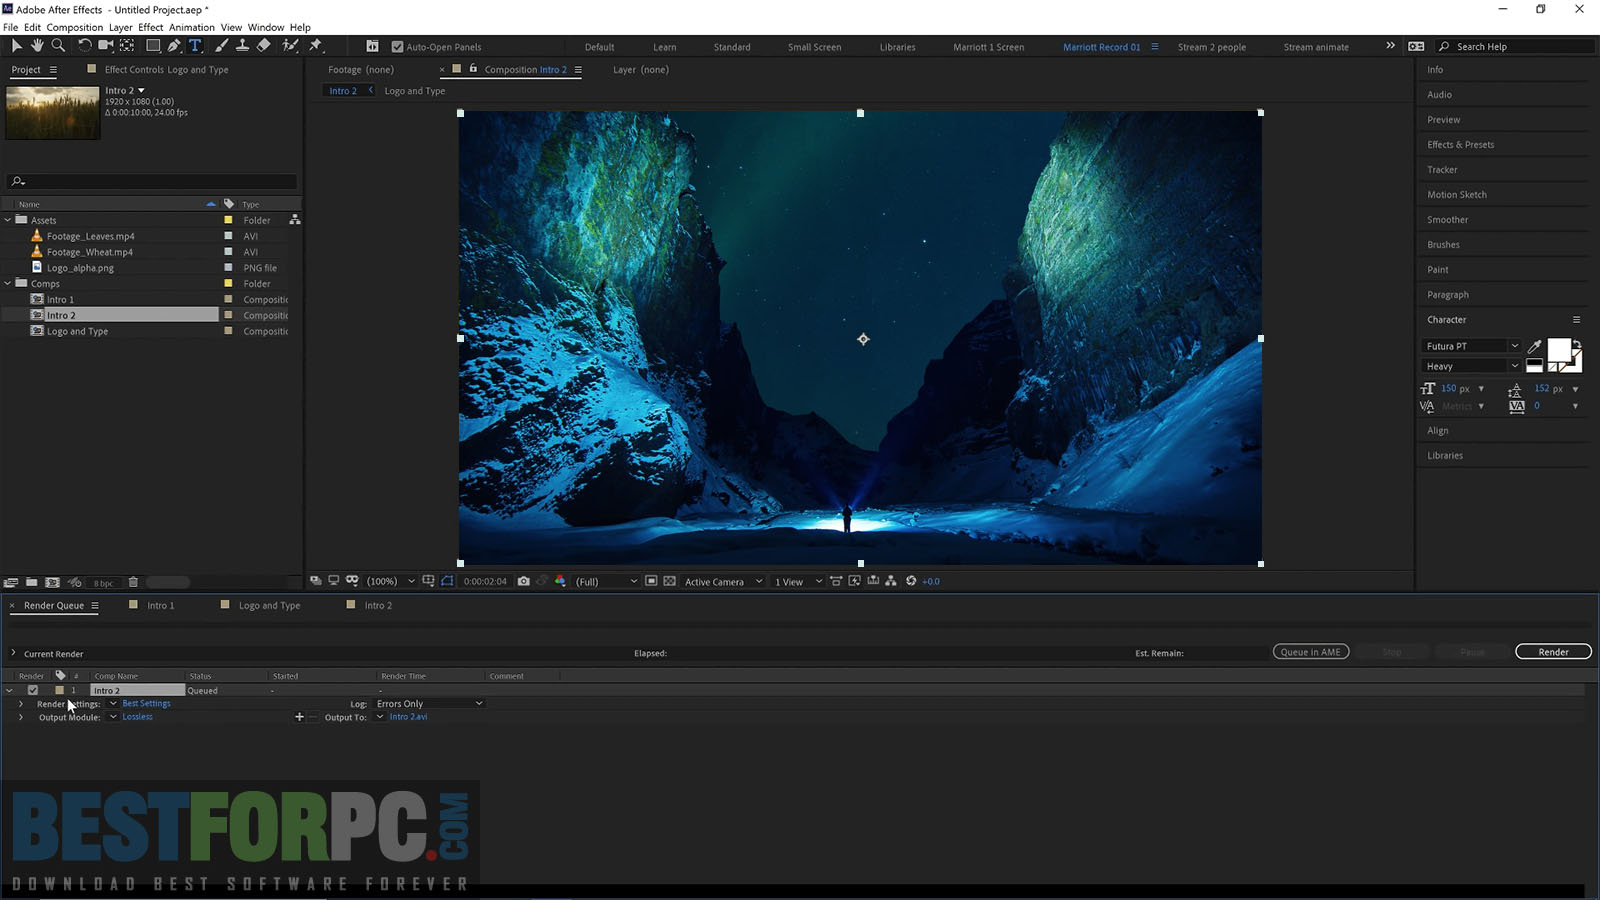 adobe after effects 7 free download full version